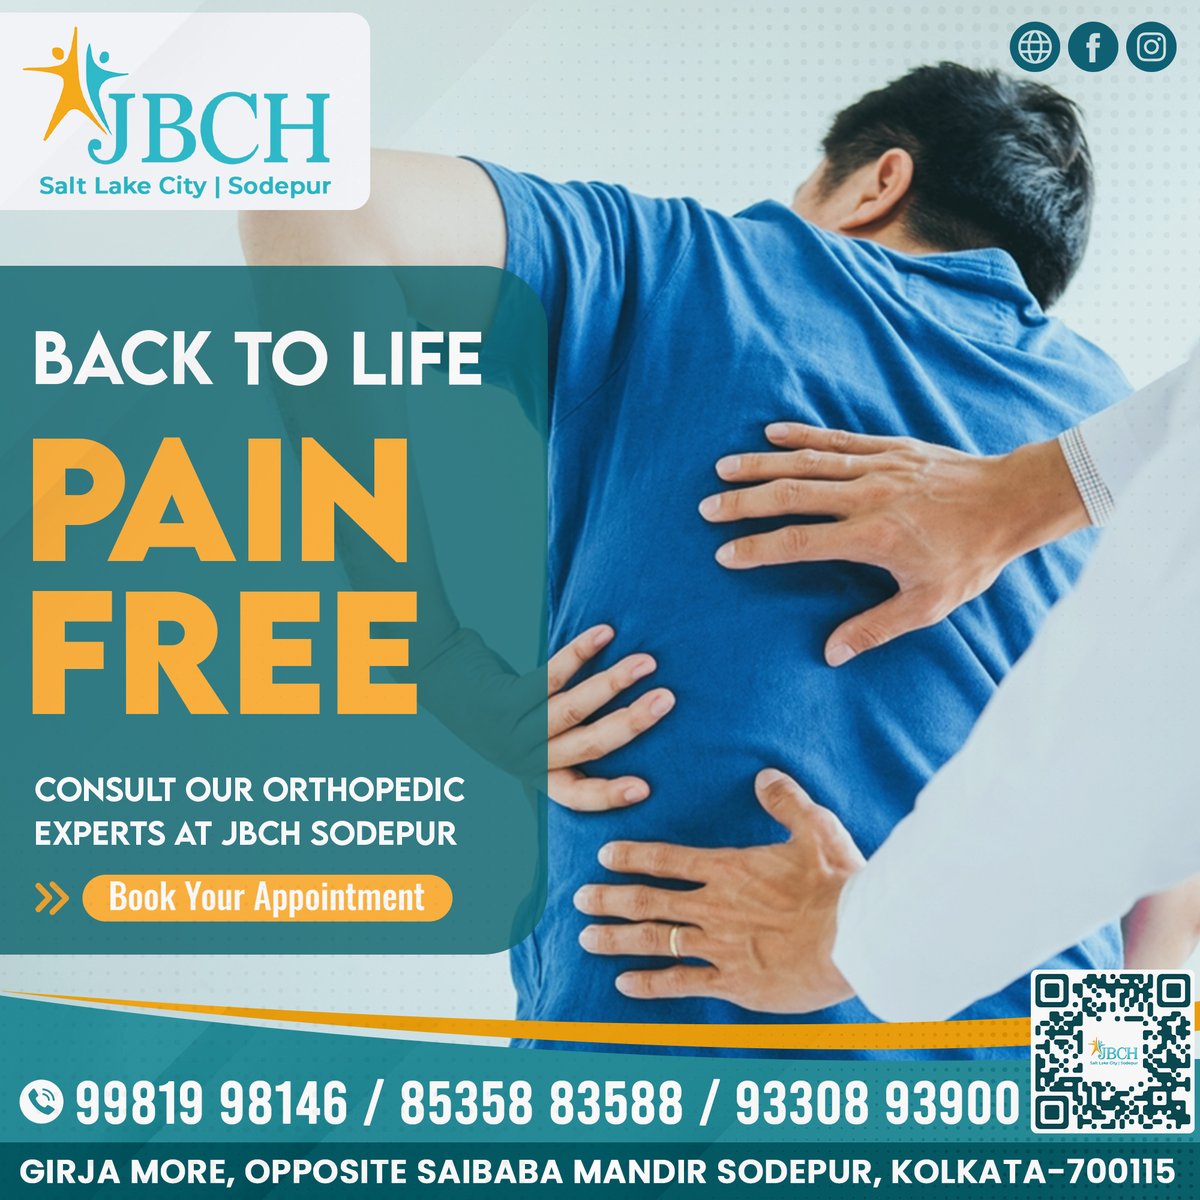 Regain a pain-free life with a visit to JBCH Sodepur. Consult with our internationally experienced doctors today.

Book Your Appointment 📝 Visit here for more information: buff.ly/3m6ARI6
.
.
#JointCare #PainFreeLiving #OrthopedicCare #StayActive #CareToCare #JointHealth